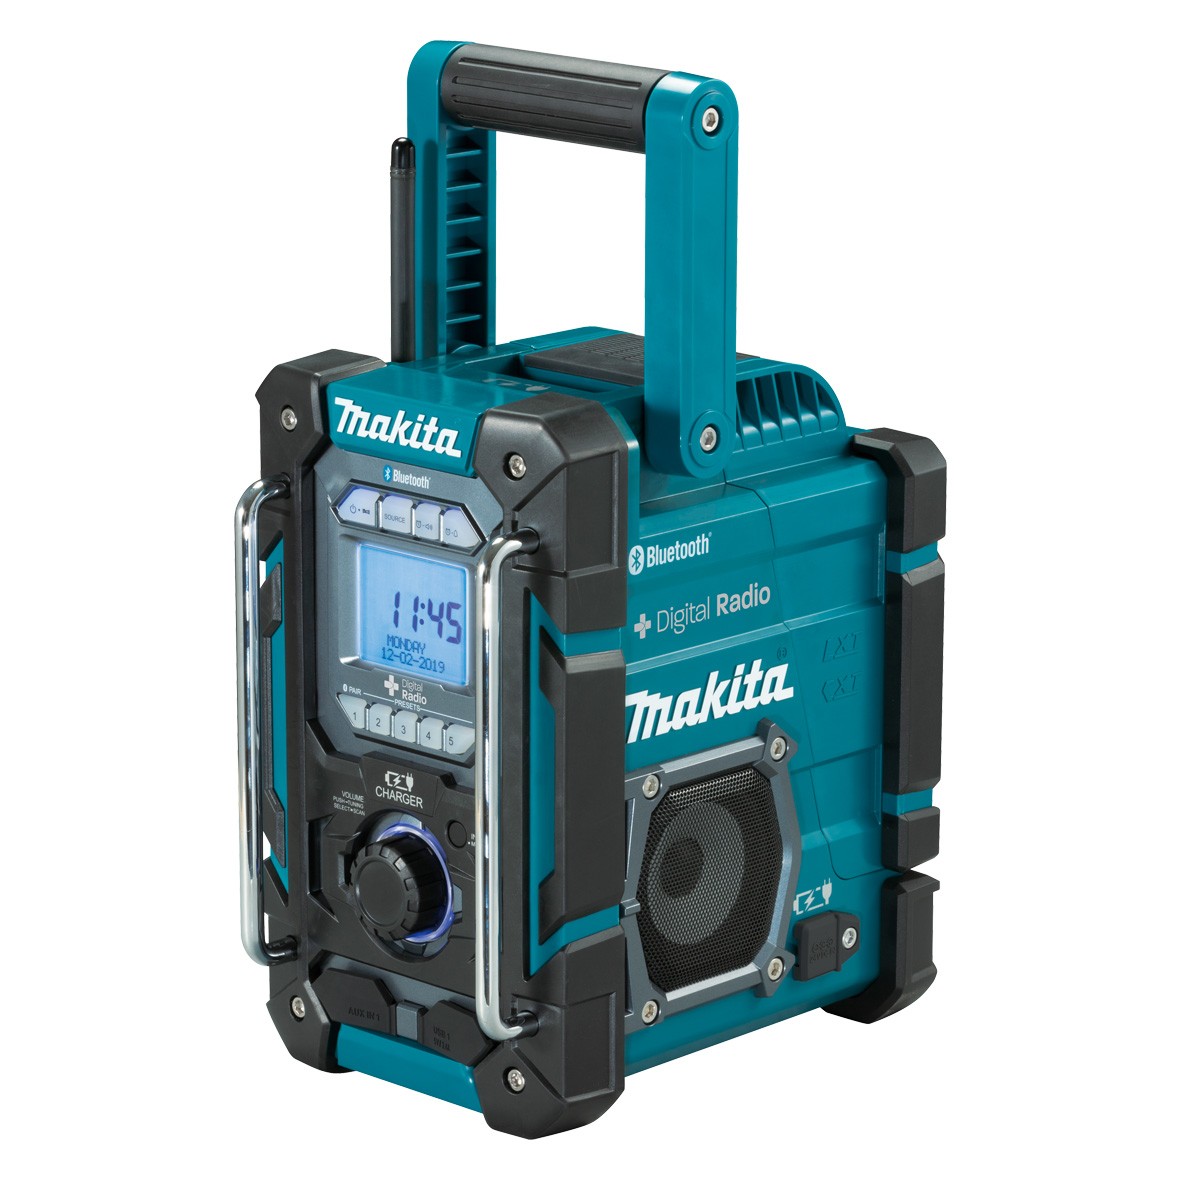 Digital Bluetooth Jobsite Charger Radio Bare (Tool Only) DMR301 by Makita